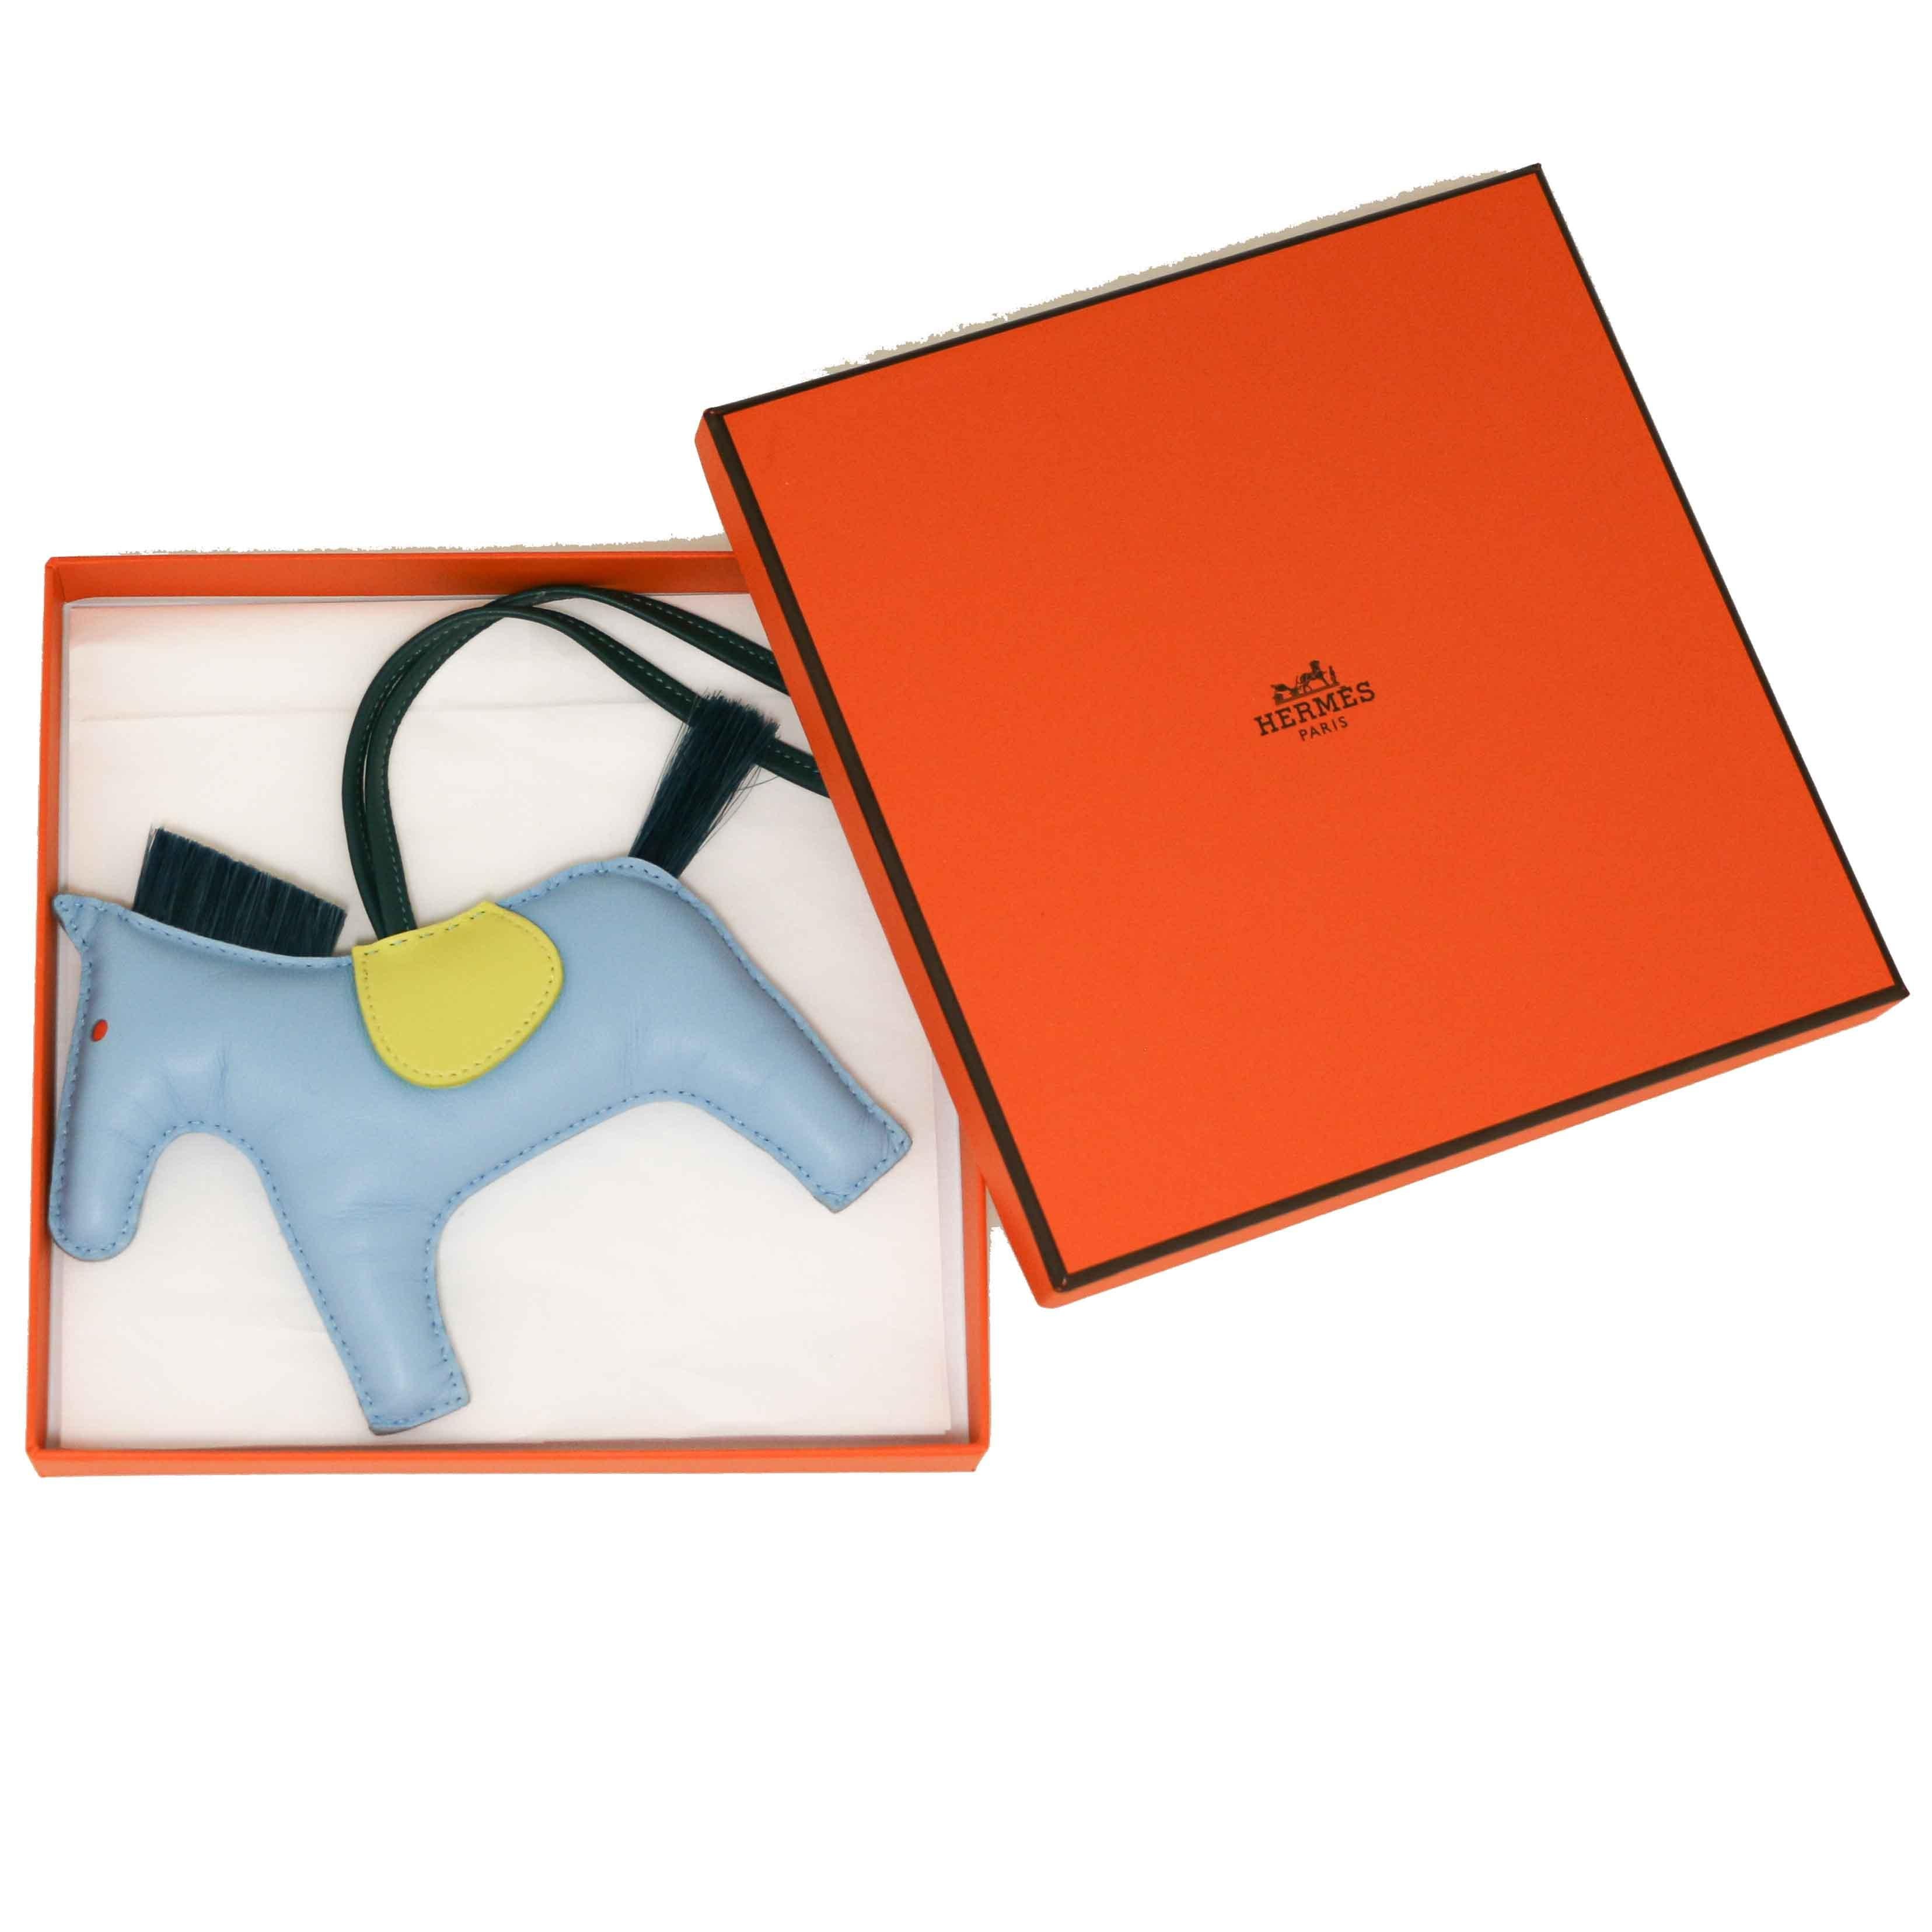 Collector Hermès charm's, it will look great on your bag !

Condition : very good, delivered in its original Hermès box
Made in France
Model: Petit H Rodéo MM
Material : leather
Color : blue, yellow, green
Dimensions:  13 x 10 cm
Details : limited